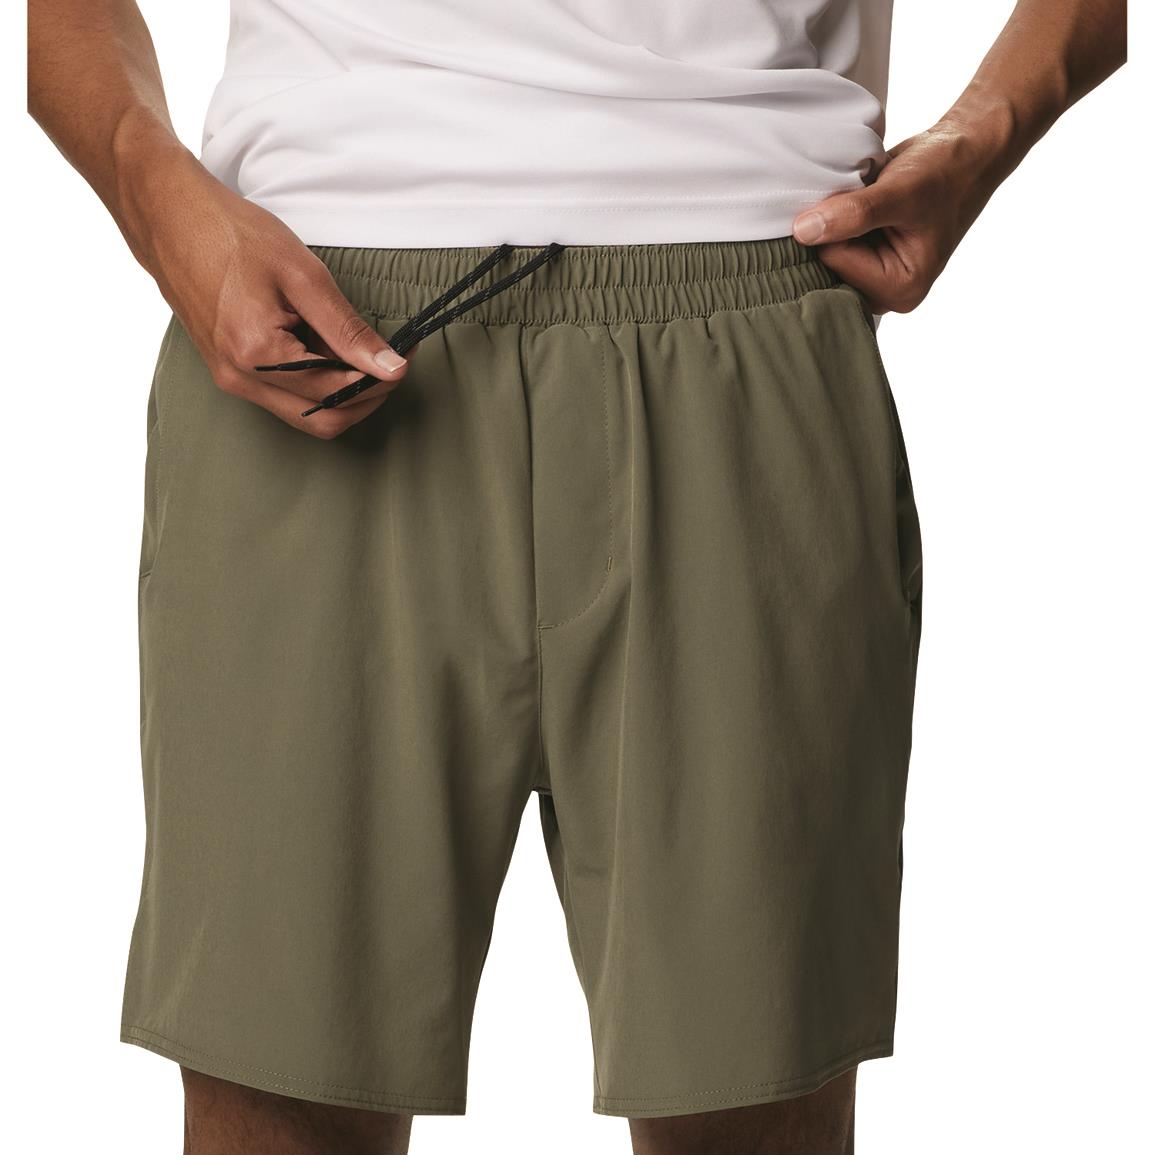 U.S. Military Surplus Beyond A8 Insulated Shorts, New - 731303 ...